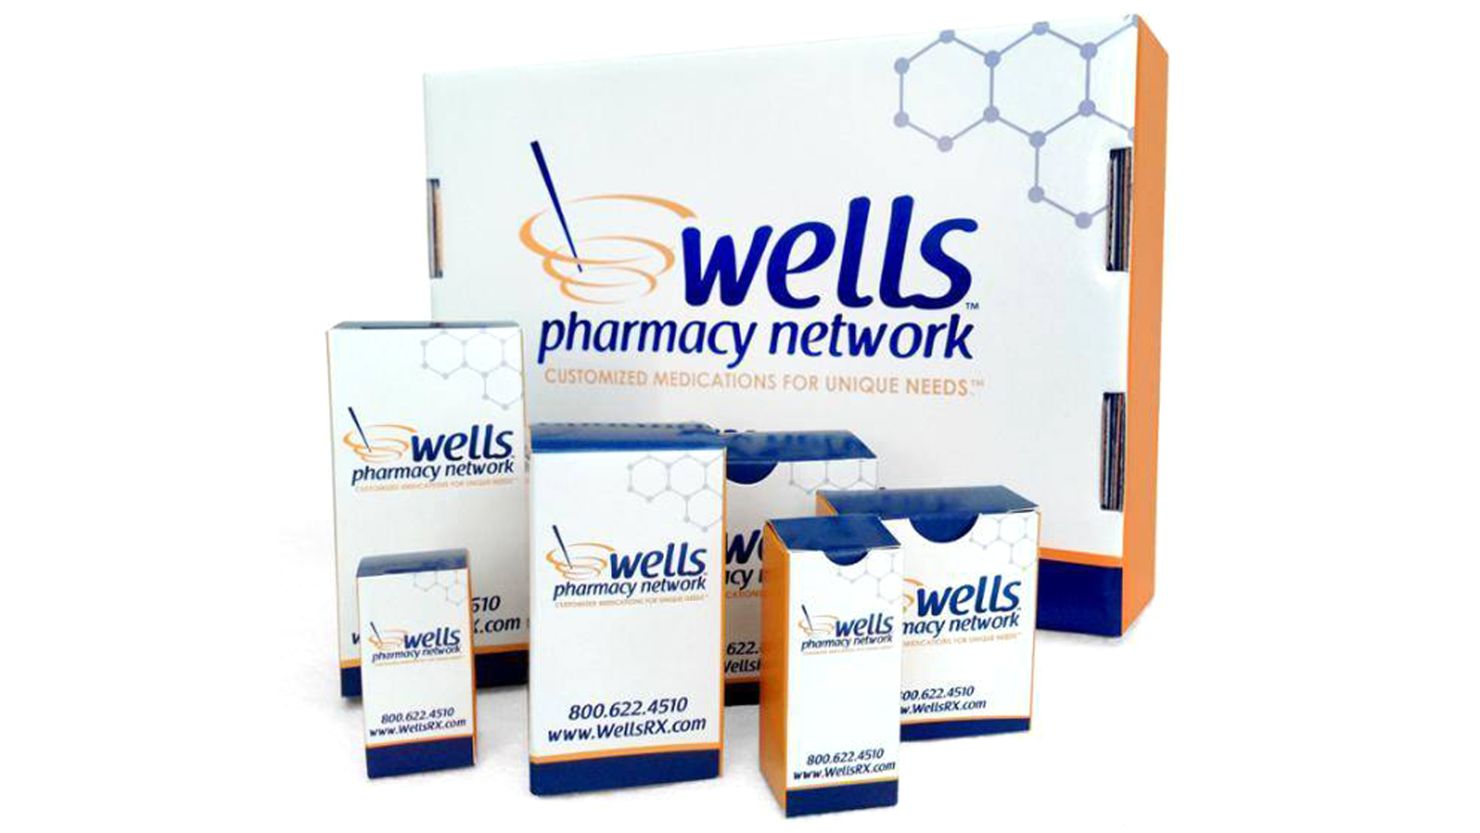 Wells Pharmacy Network is recalling 616 products.